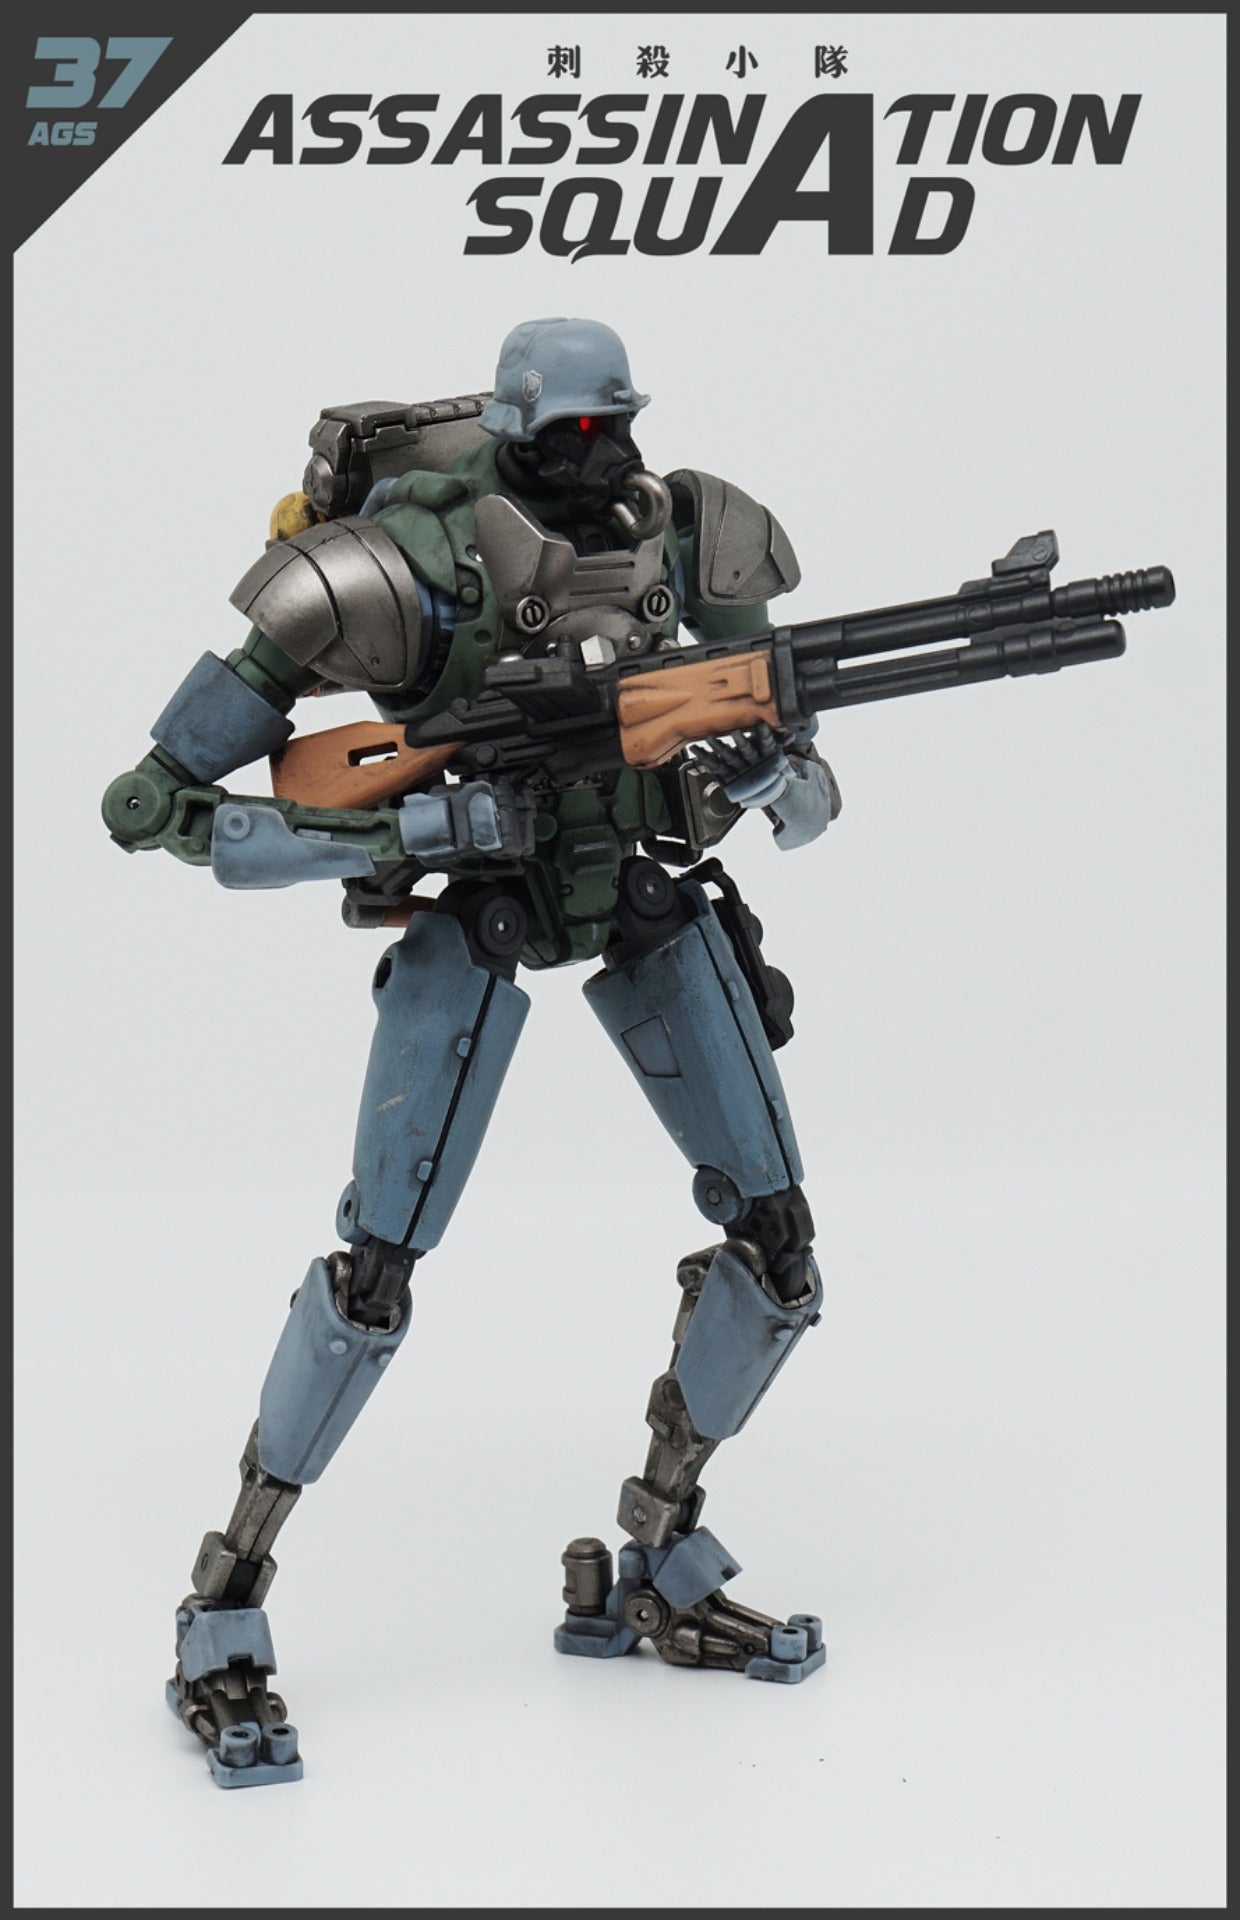 A new generation of 1/12 superalloy mecha by ToysComic! This Forging Soul AGS-37 Assassination Squad Signaler Vulture comes armed with various weapons and accessories.